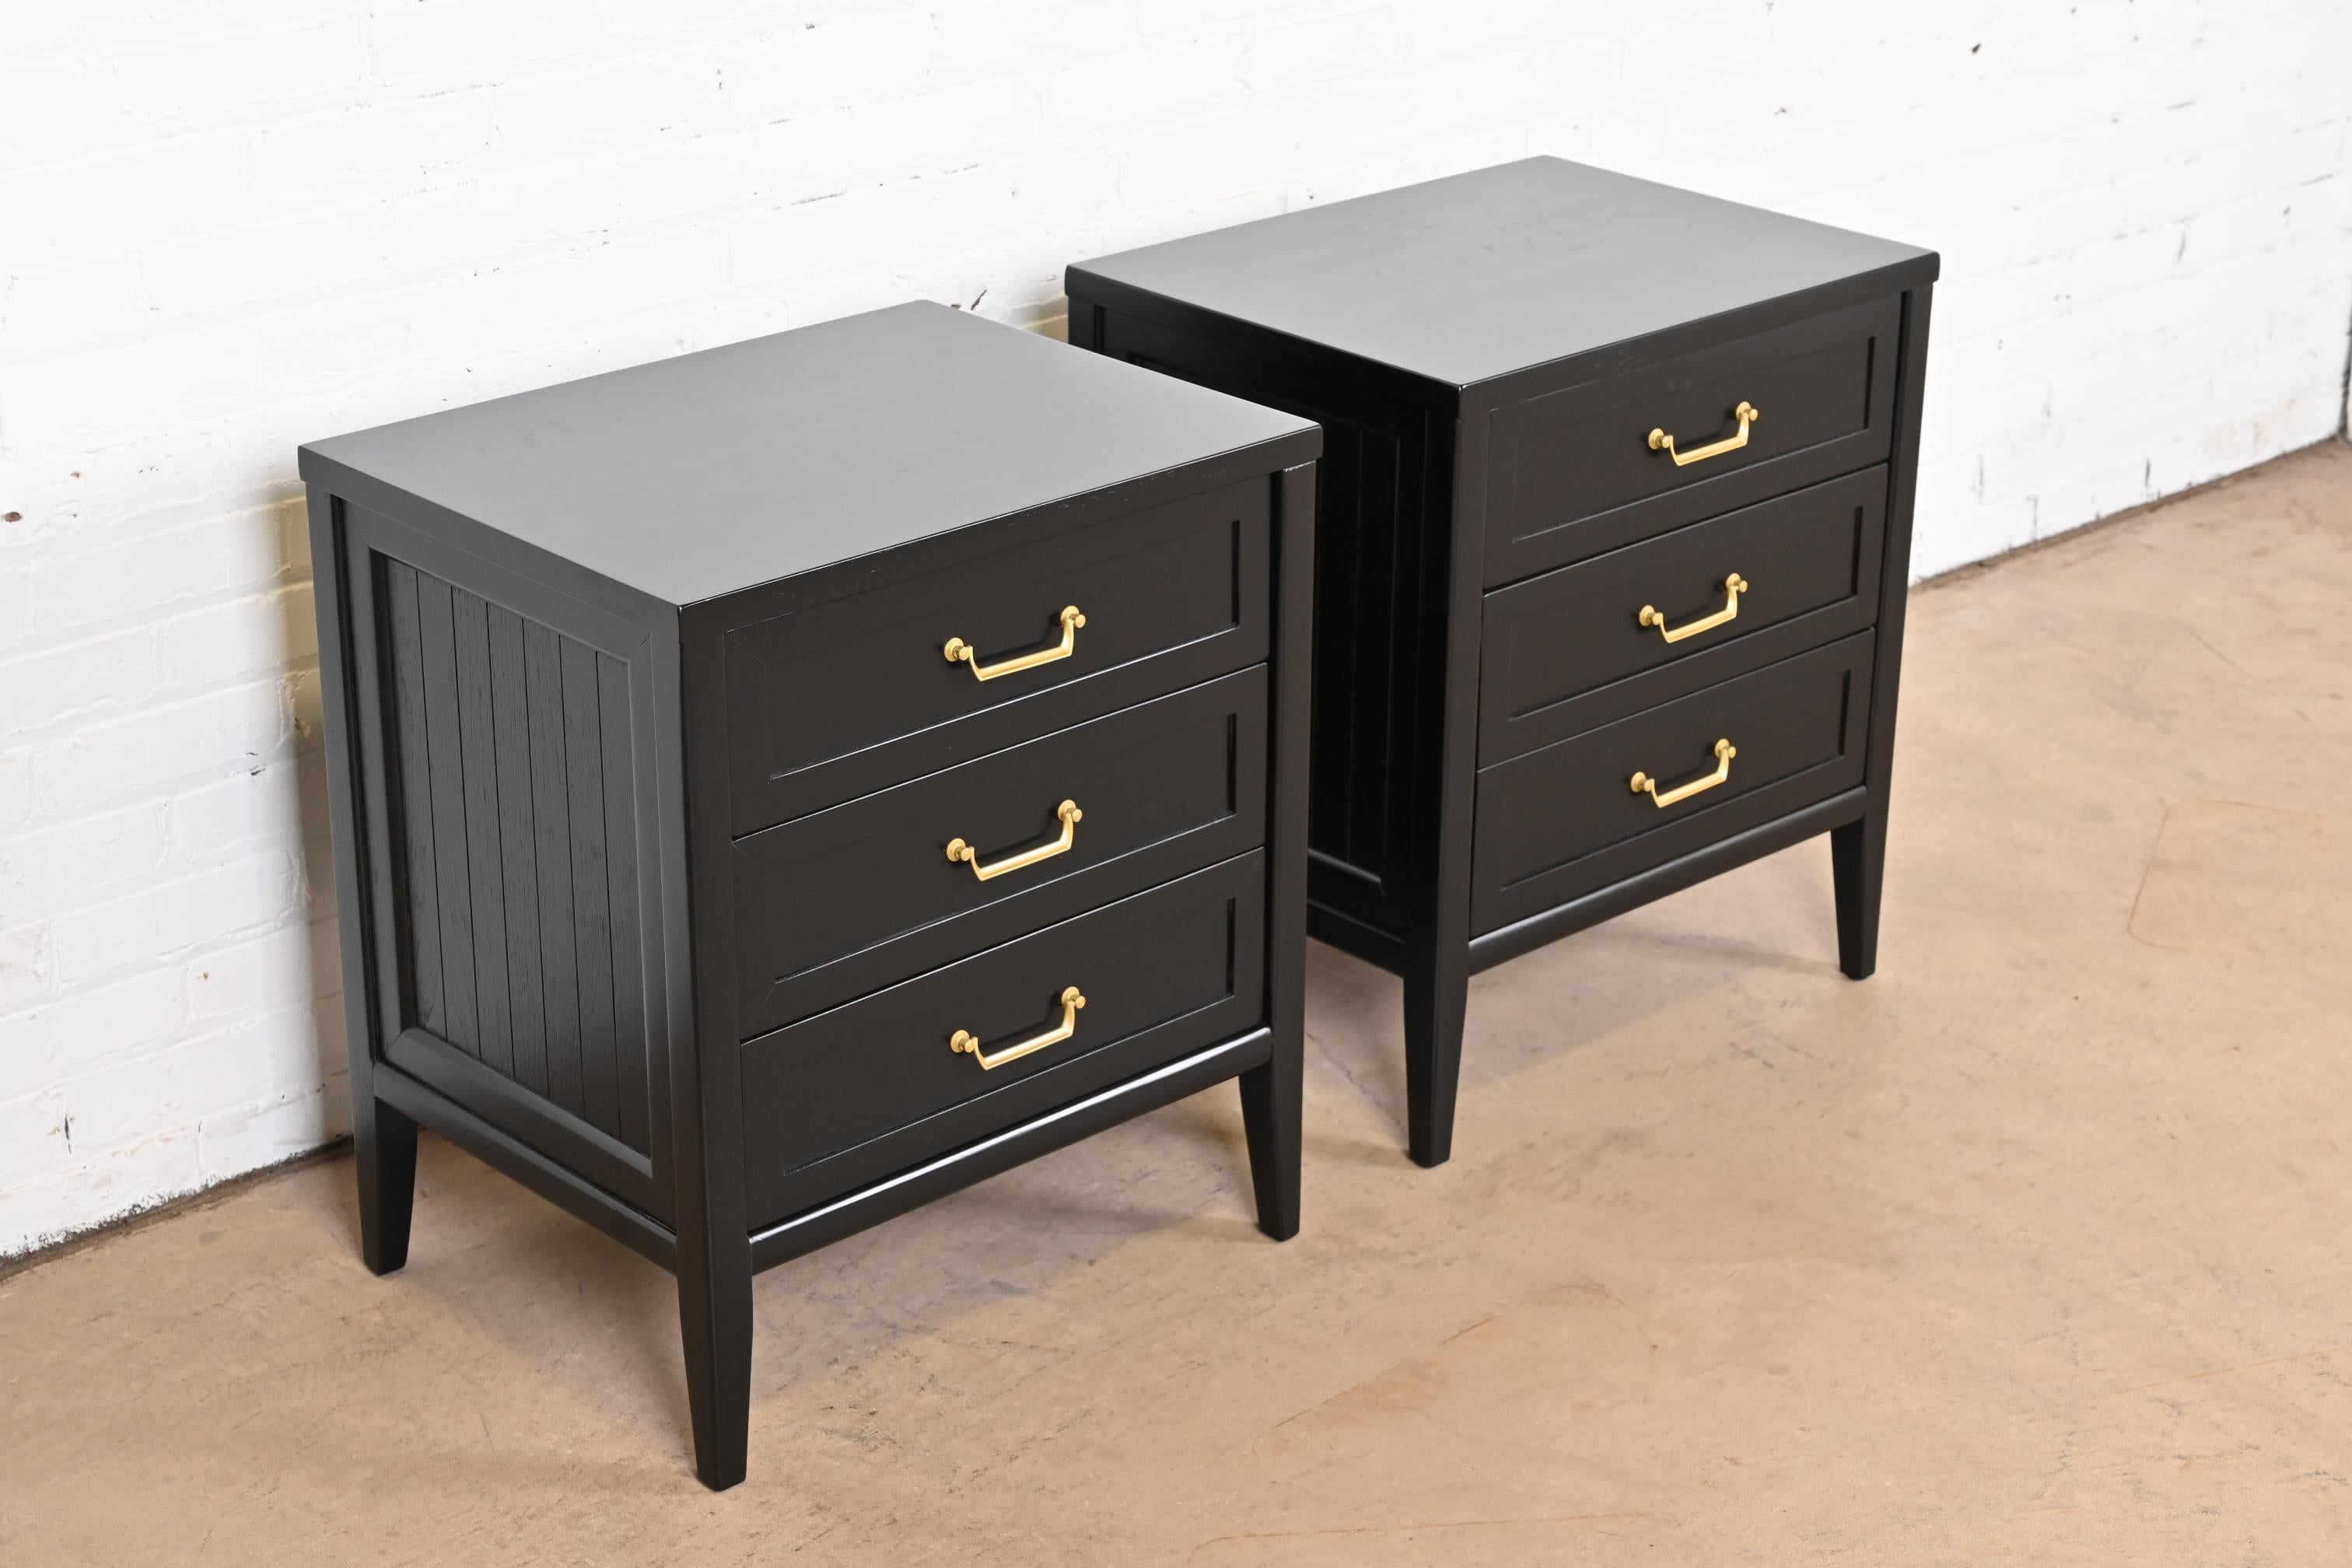 Mid-20th Century American of Martinsville French Regency Black Lacquered Nightstands, Refinished